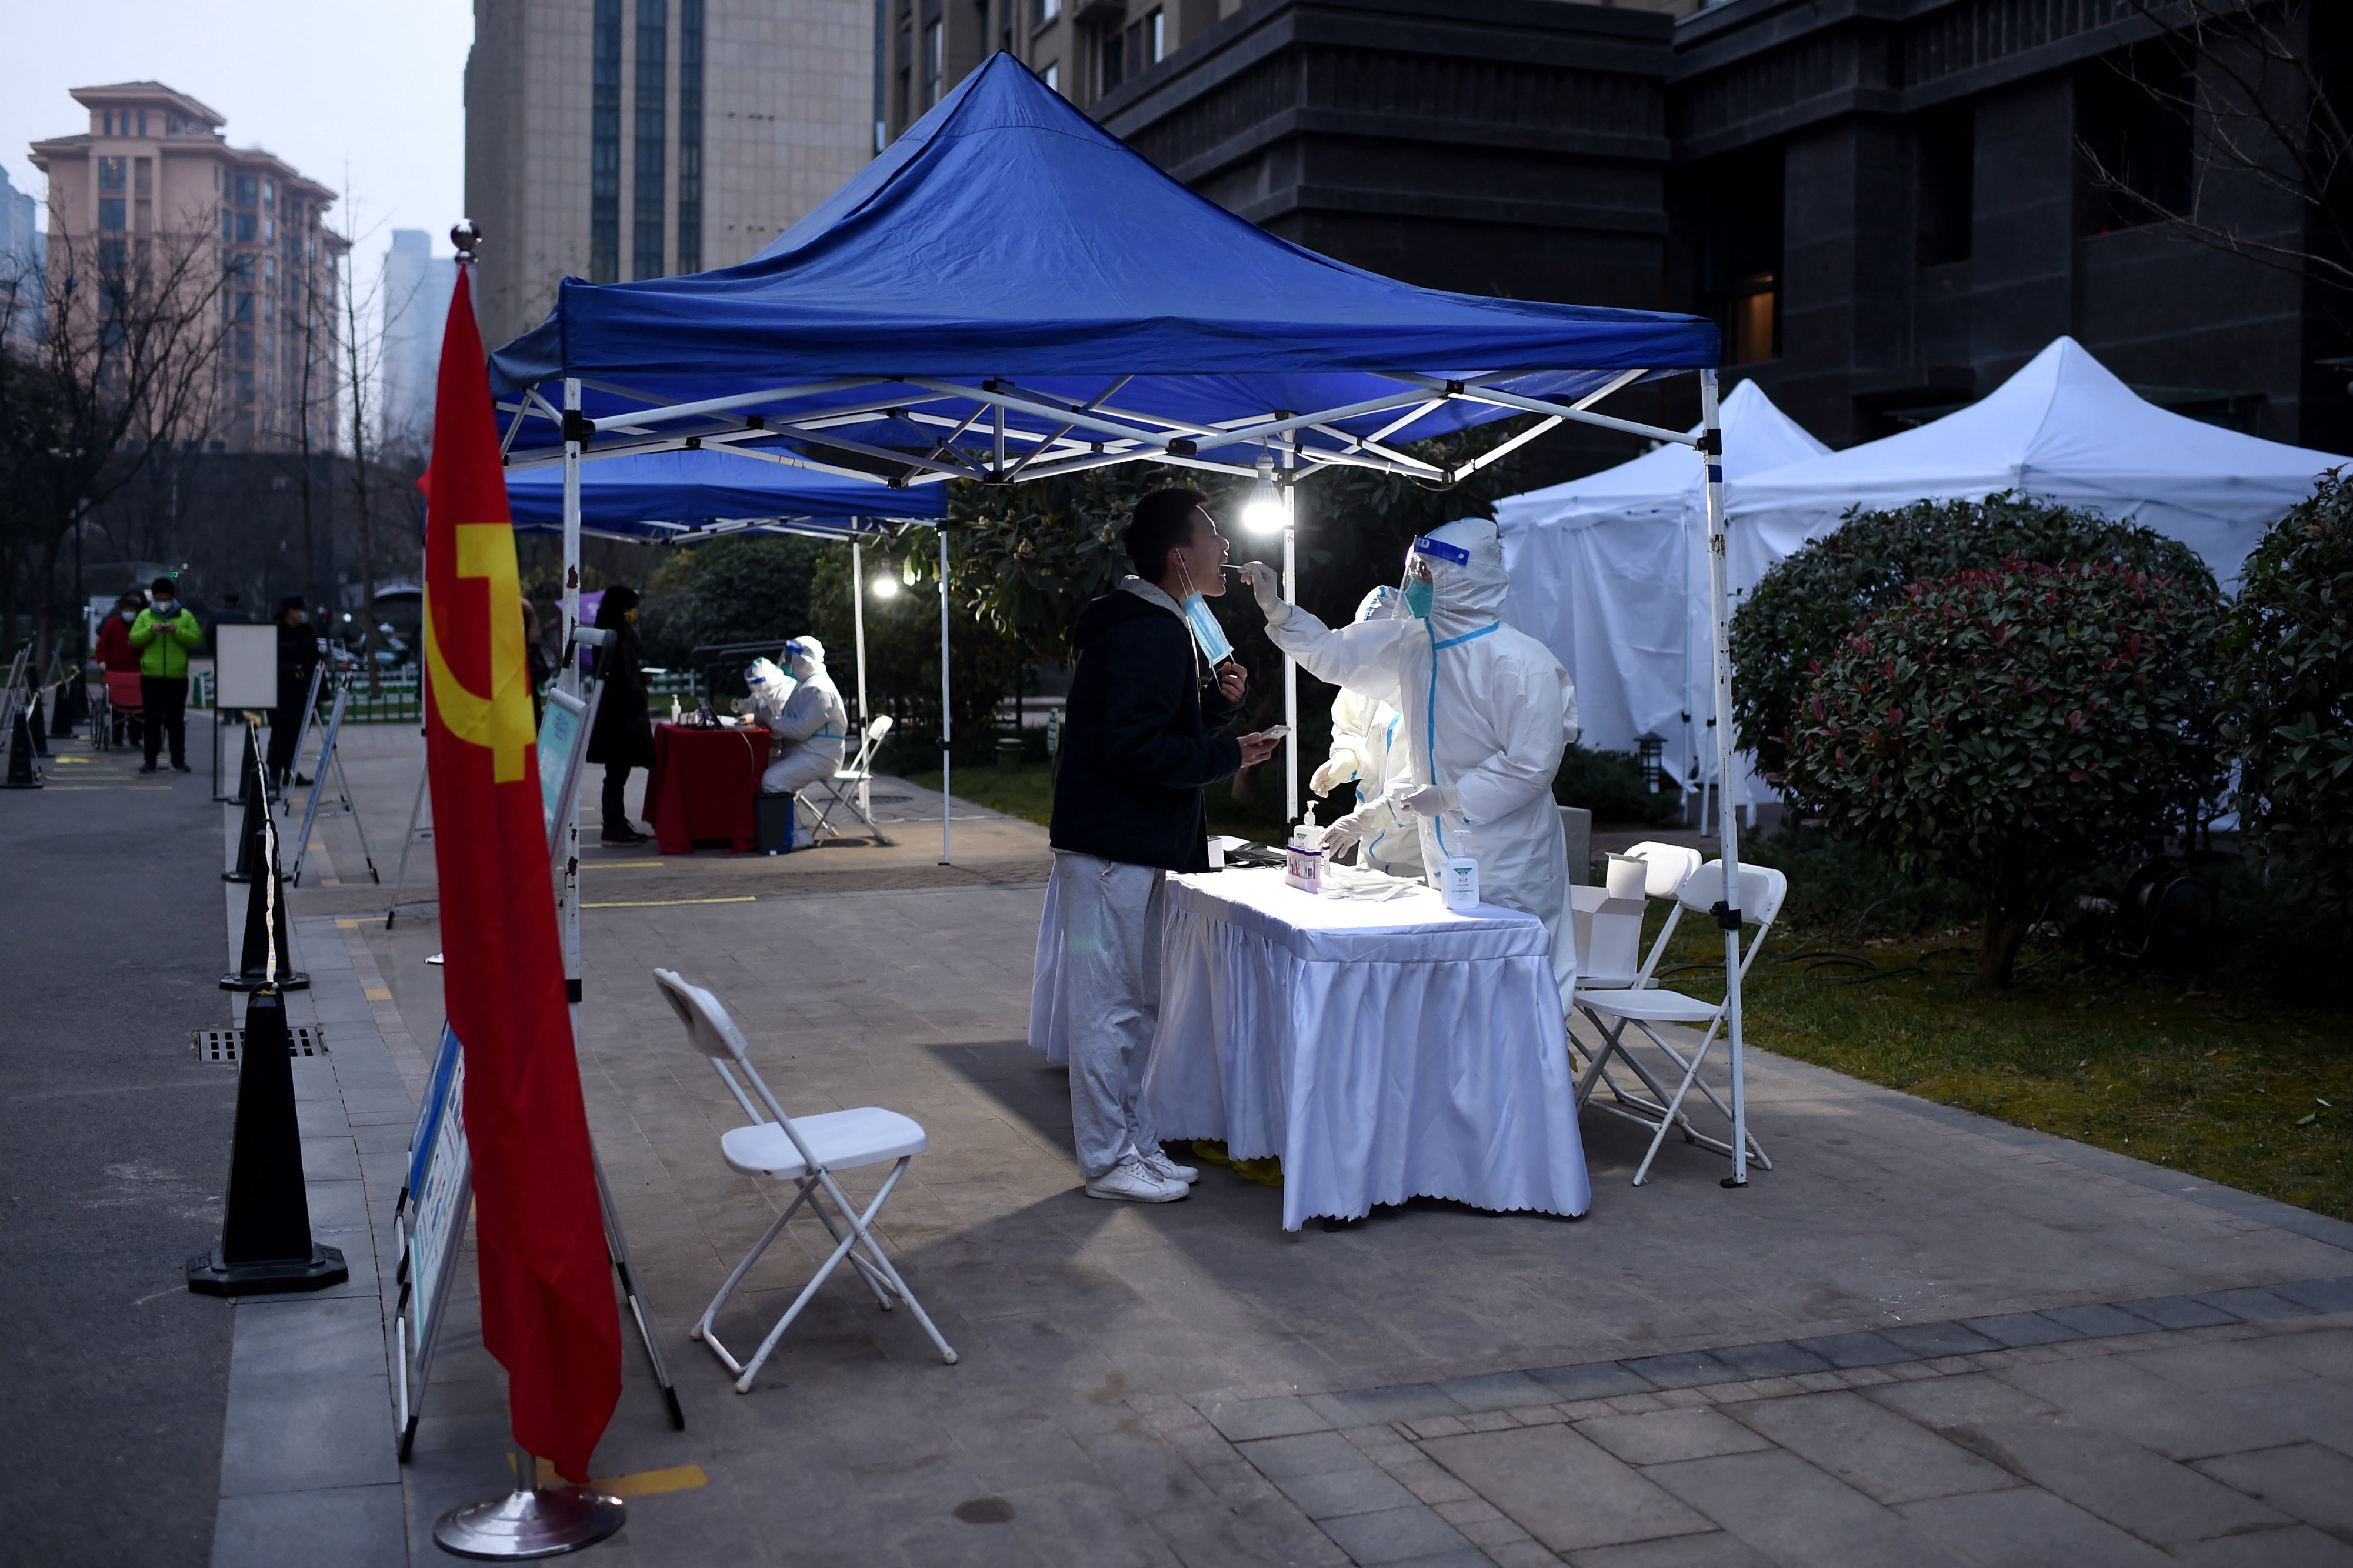 File: A resident undergoes a nucleic acid test for Covid at a residential area that is under restrictions following a recent coronavirus outbreak in Xi’an